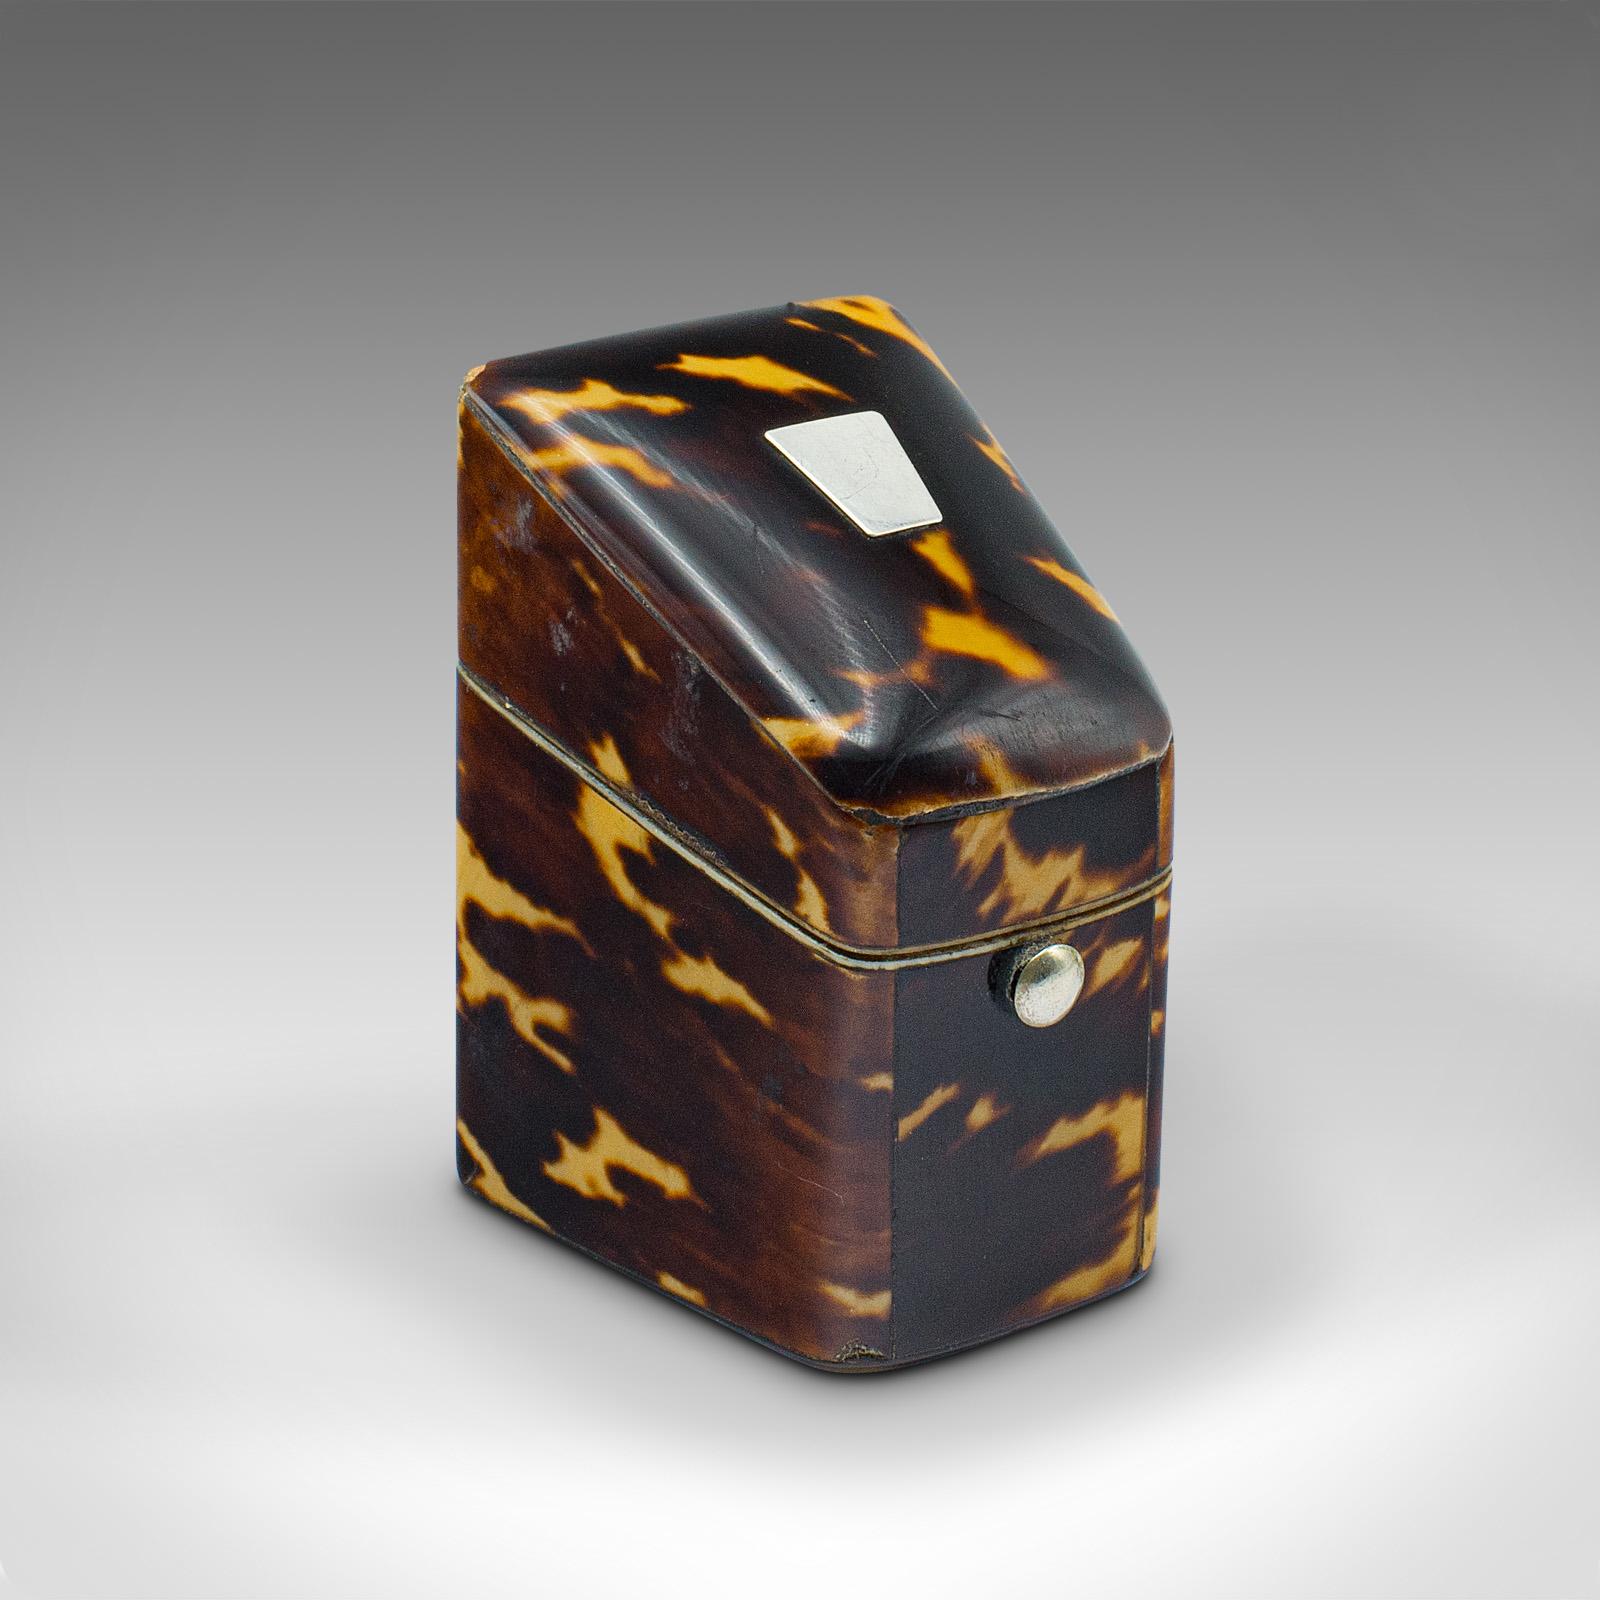 
This is a small antique lady's stamp box. An English, faux tortoiseshell case, dating to the Edwardian period, circa 1910.

Charming and petite, offering an elegant home for stamps
Displays a desirable aged patina and in good original